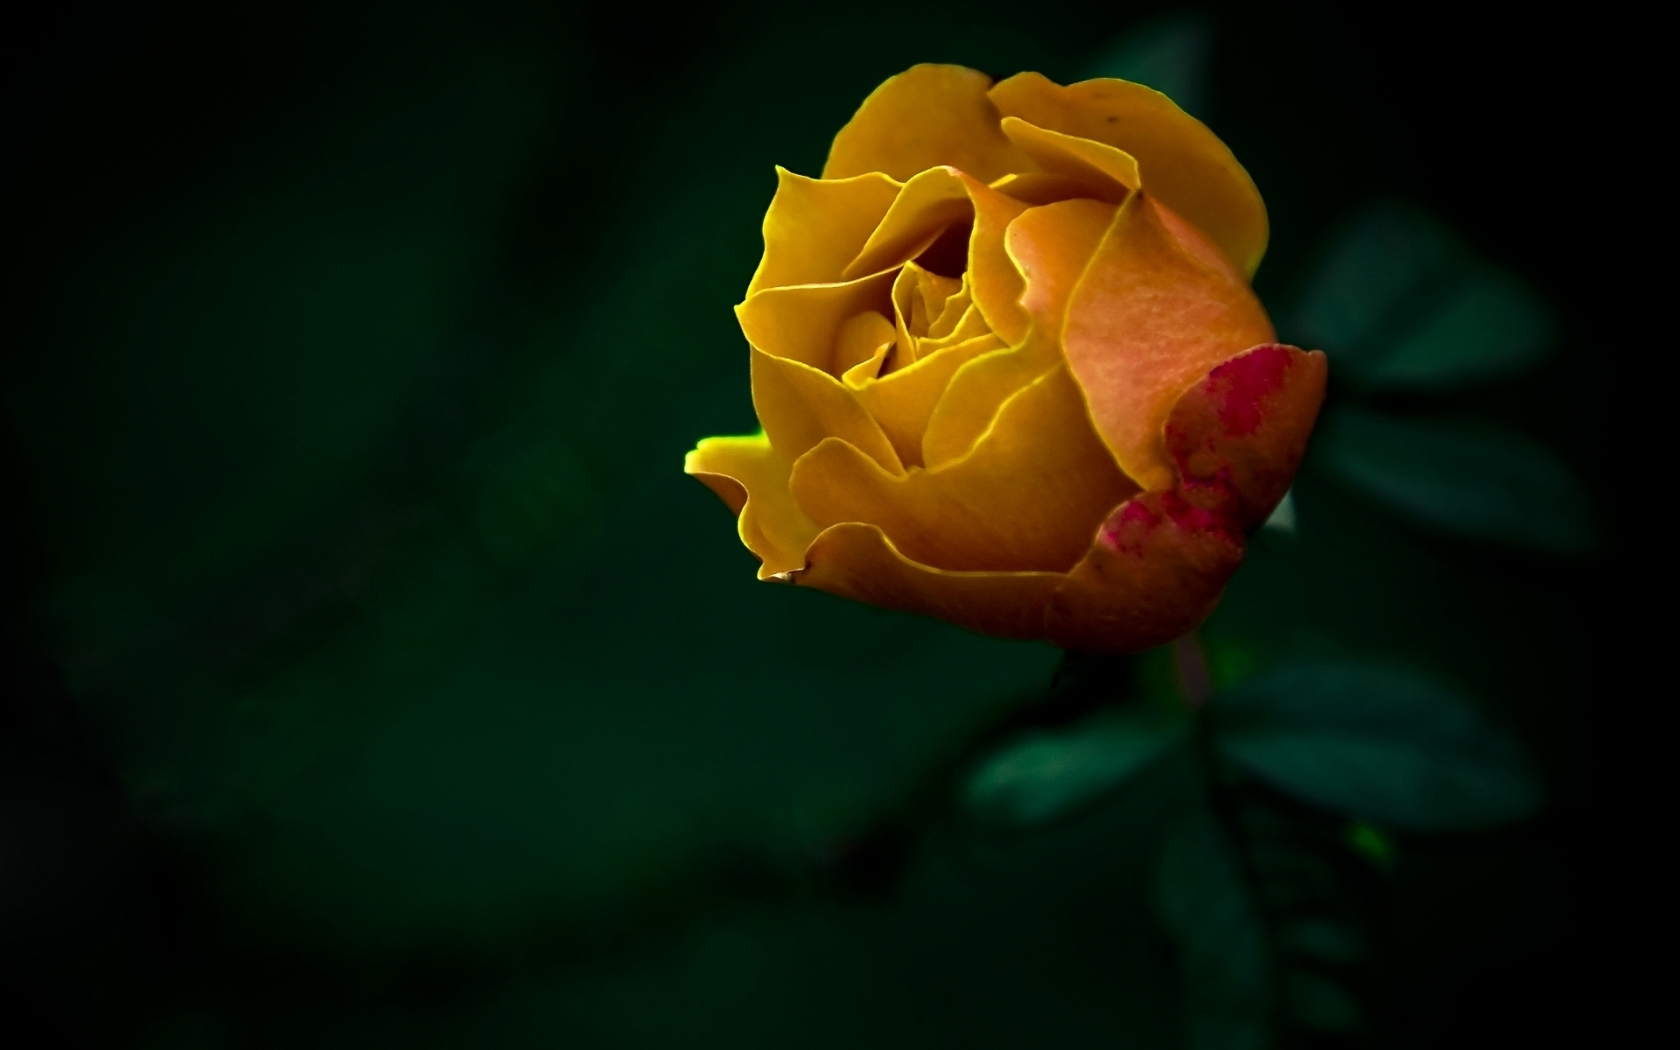 The last Rose for 1680 x 1050 widescreen resolution